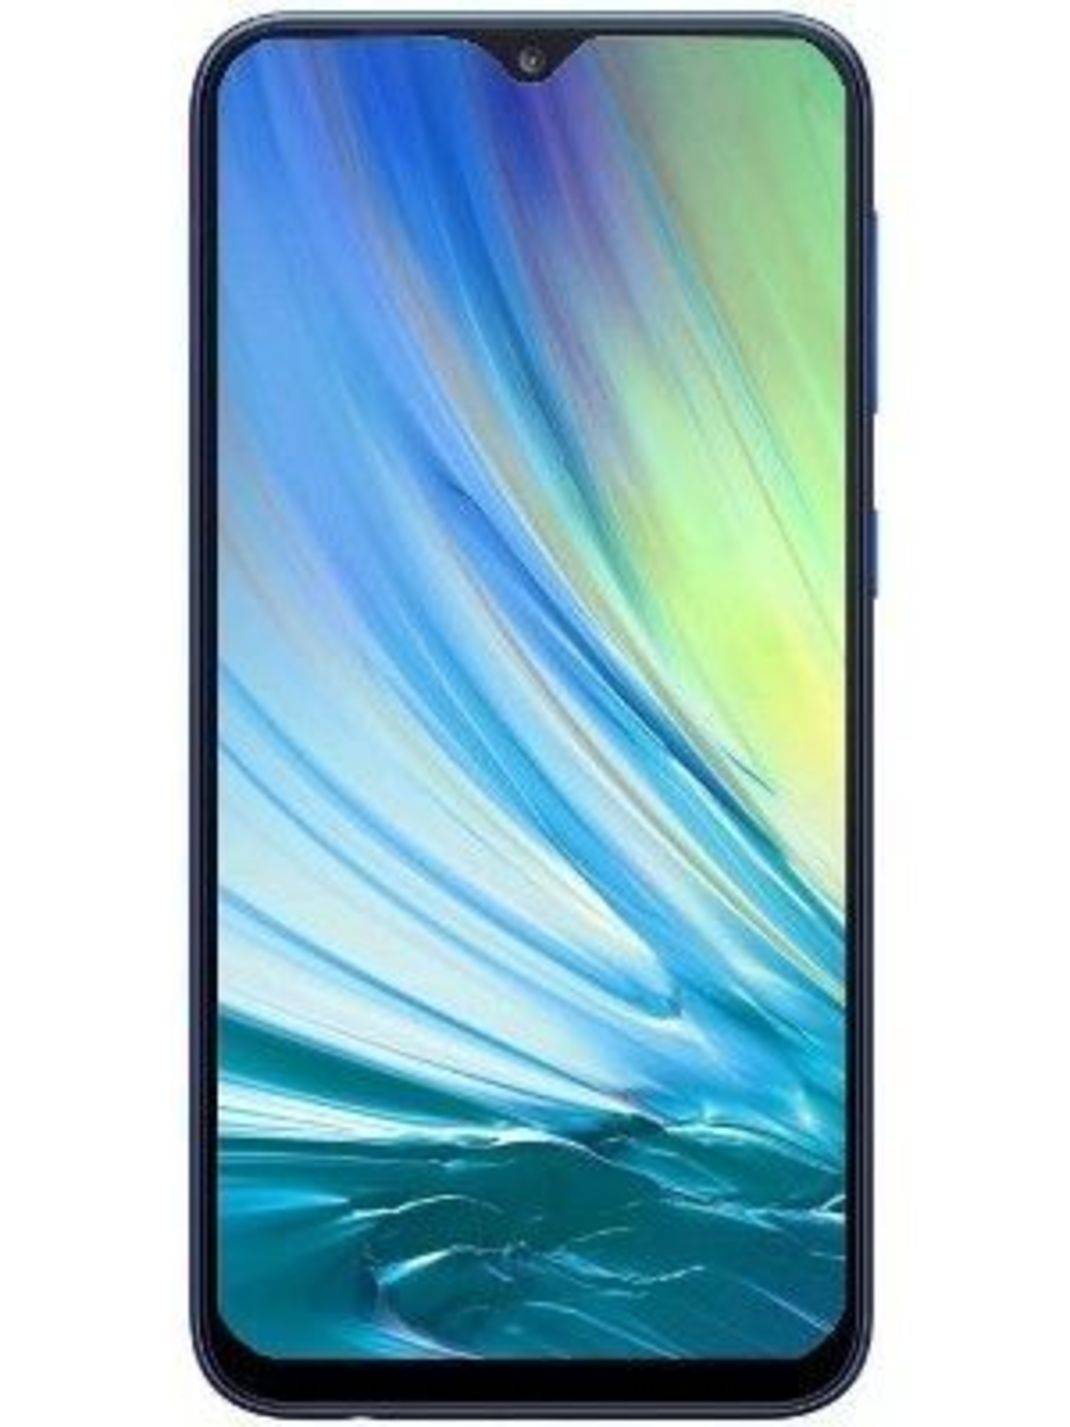 Compare Samsung Galaxy A01 Vs Samsung Galaxy M11 Vs Samsung Galaxy M Samsung Galaxy A01 Vs Samsung Galaxy M11 Vs Samsung Galaxy M Comparison By Price Specifications Reviews Amp Features